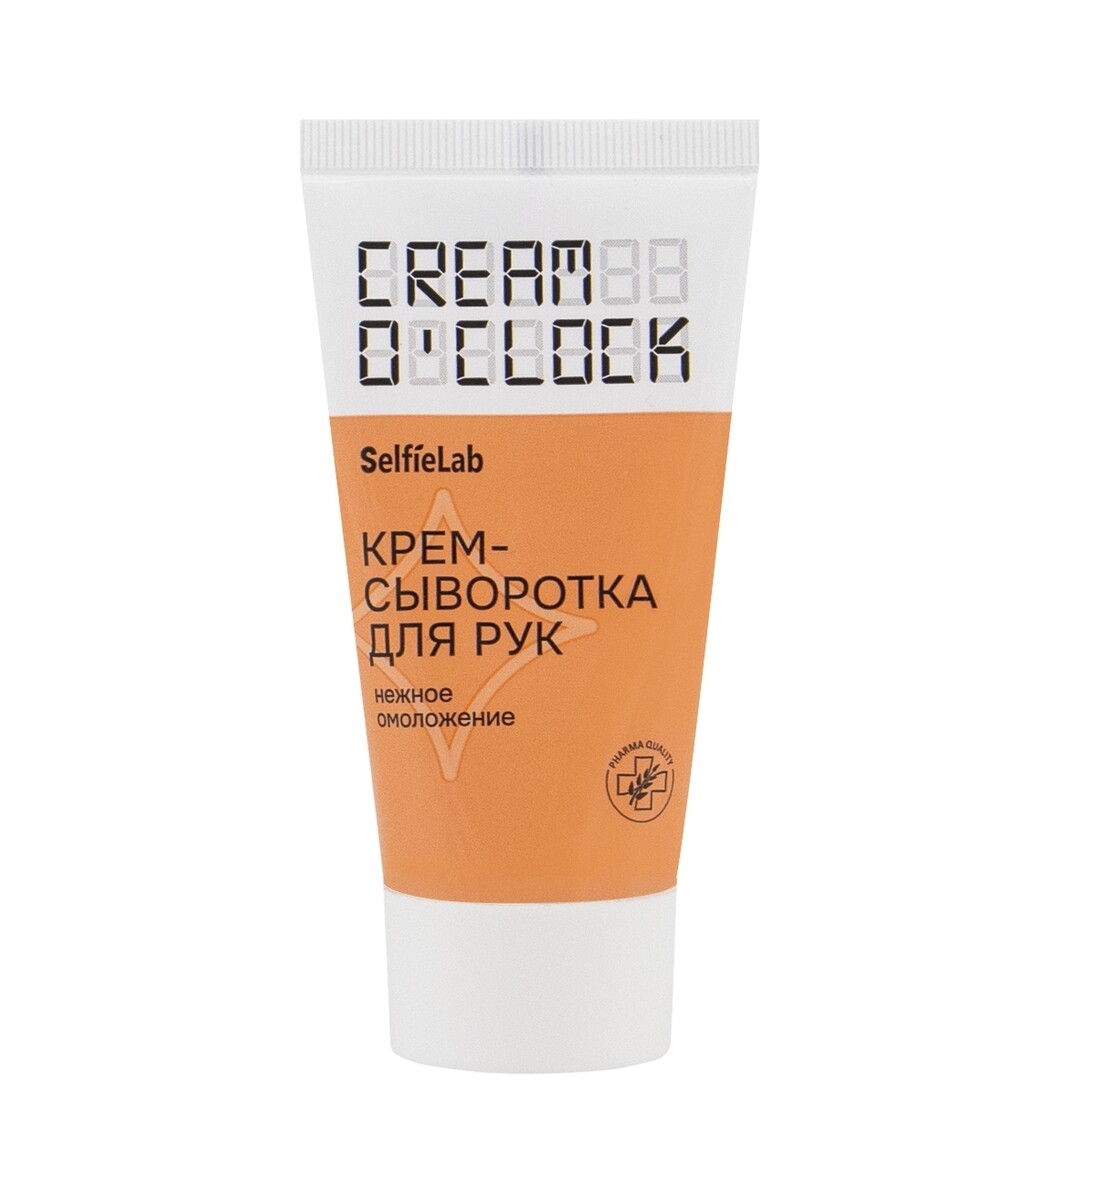 Cream o'clock крем-сыворотка для рук,туба 50мл d68h jewelry ultrasonic cleaning machine gold and silver copper jewelry glasses clock dental decontamination degreasing cleaning